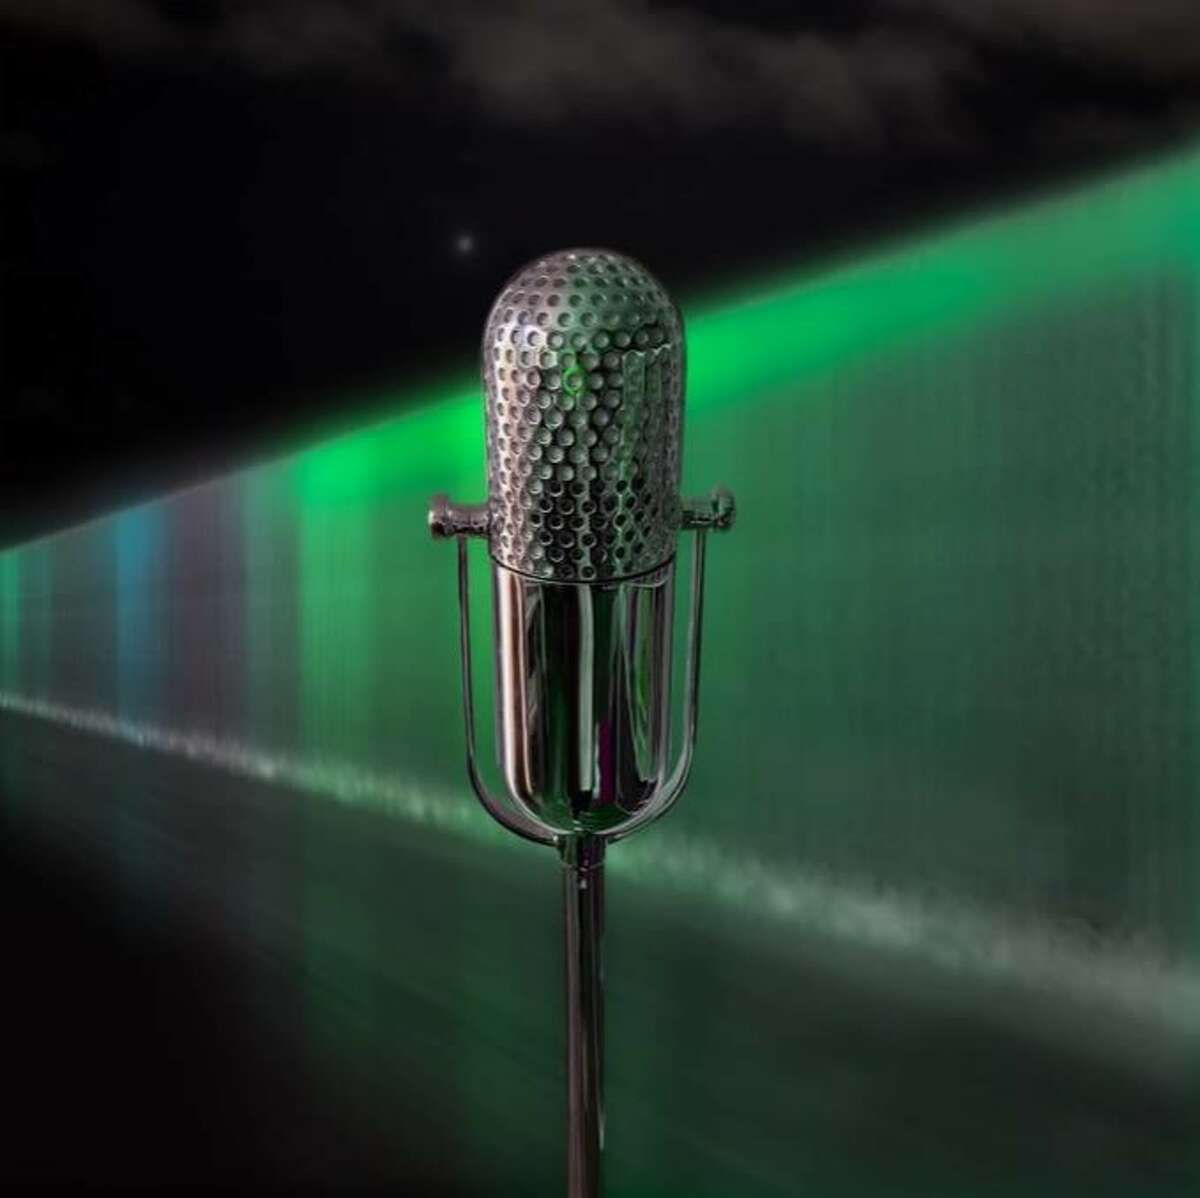 Adam Frank's public art piece "STREAM," shown in a rendering, includes a microphone tucked into a bronze sculpture of a microphone. Lights in the nearby water wall respond to sounds made into the microphone. The installation is part of the San Pedro Creek Culture Park.